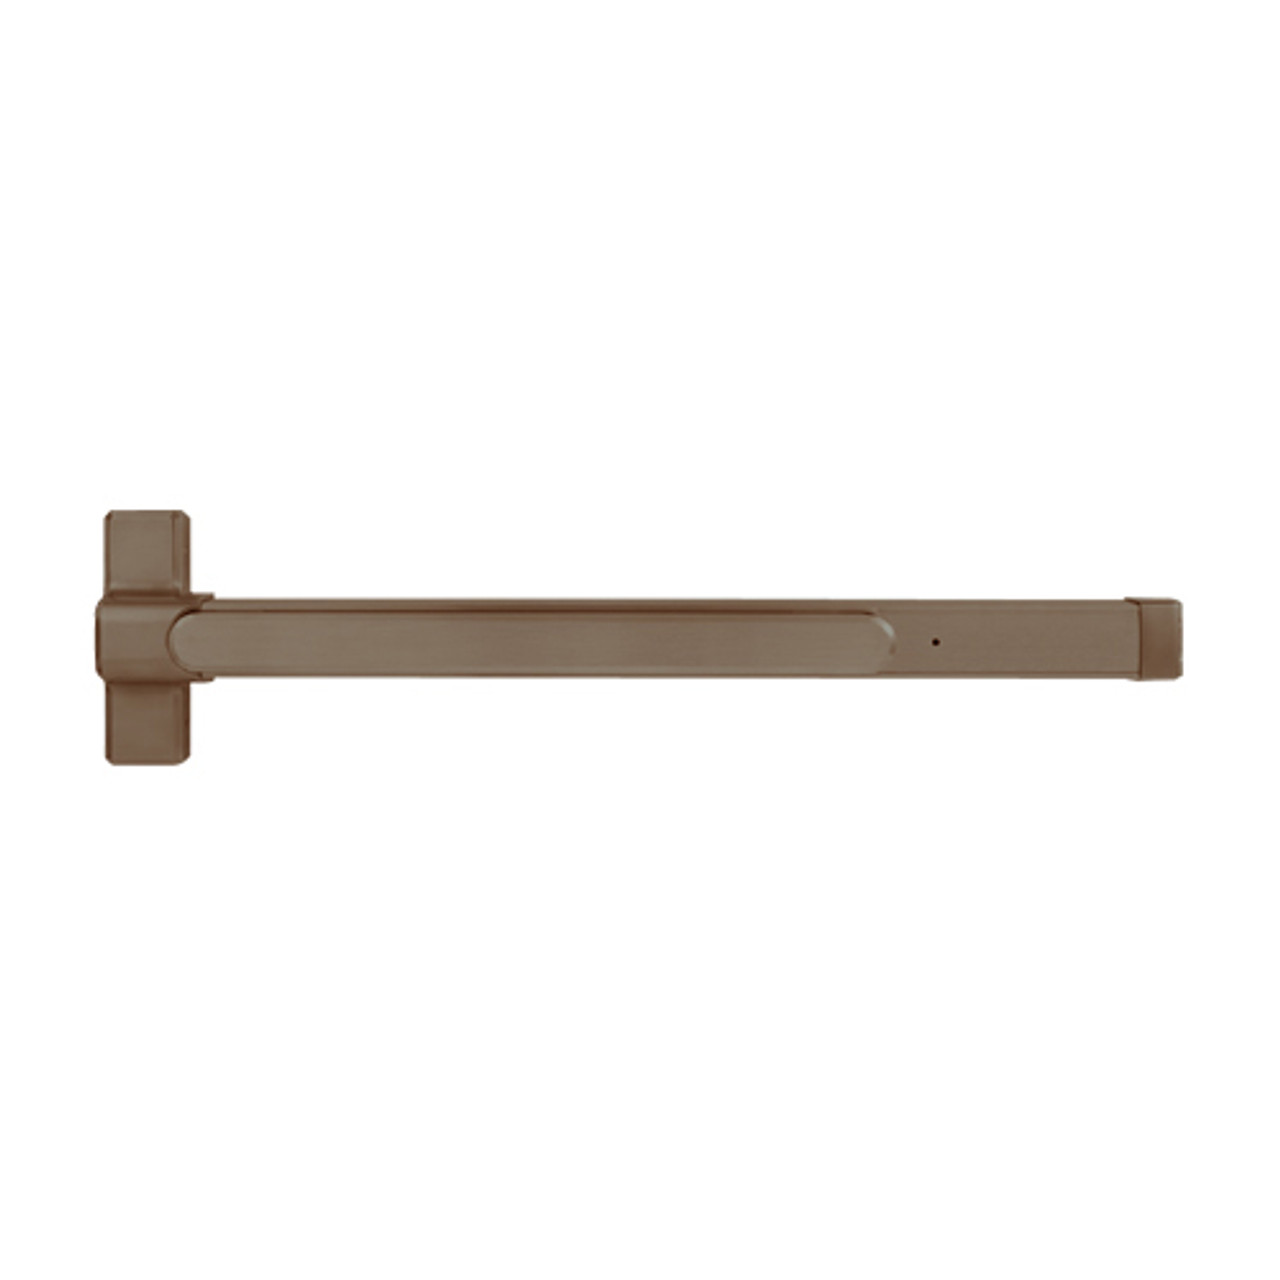 QED117ED-48-8-313AN Stanley QED100 Series Heavy Duty Surface Vertical Rod Hex Dog Exit Device in Anodized Duranodic Bronze Finish